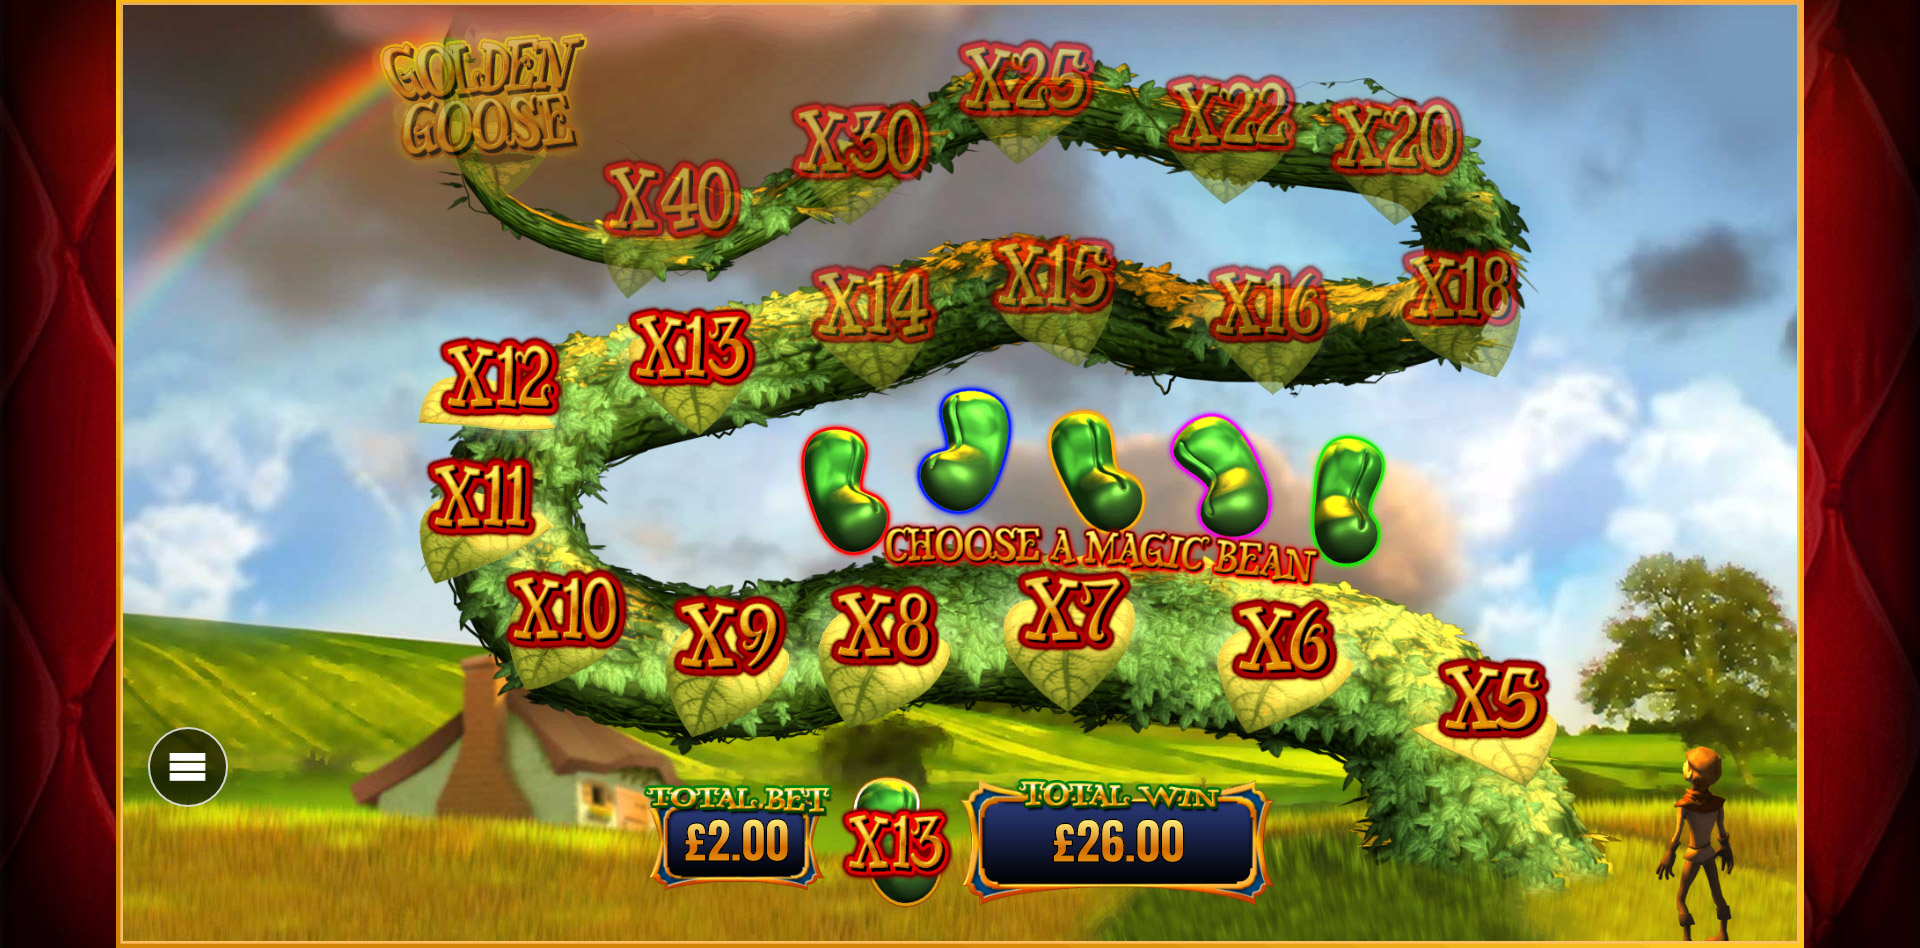 Trail game feature in Wish Upon A Jackpot slot at PlayOJO